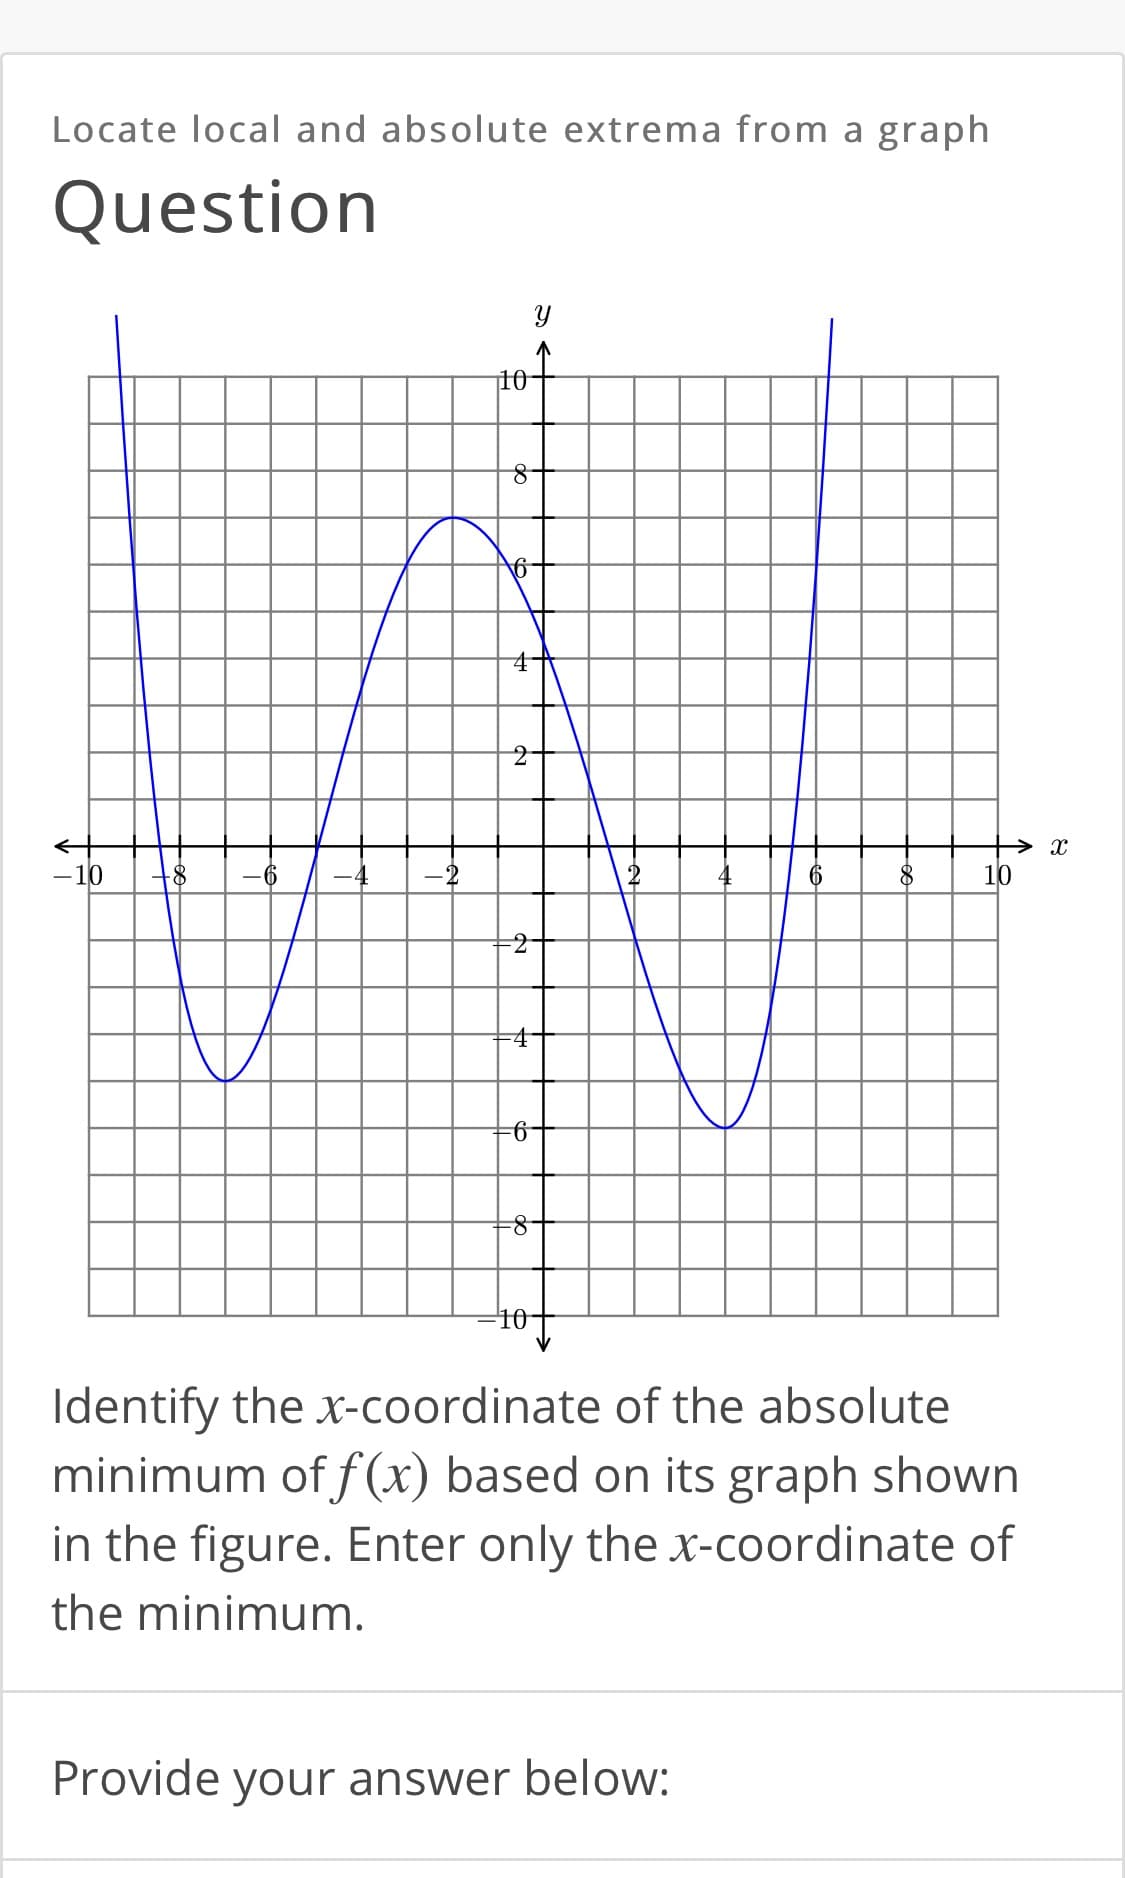 Locate local and absolute extrema from a graph
Question
10
-10
-4
-2
10
9-
10
Identify the x-coordinate of the absolute
minimum of f(x) based on its graph shown
in the figure. Enter only the x-coordinate of
the minimum.
Provide your answer below:
